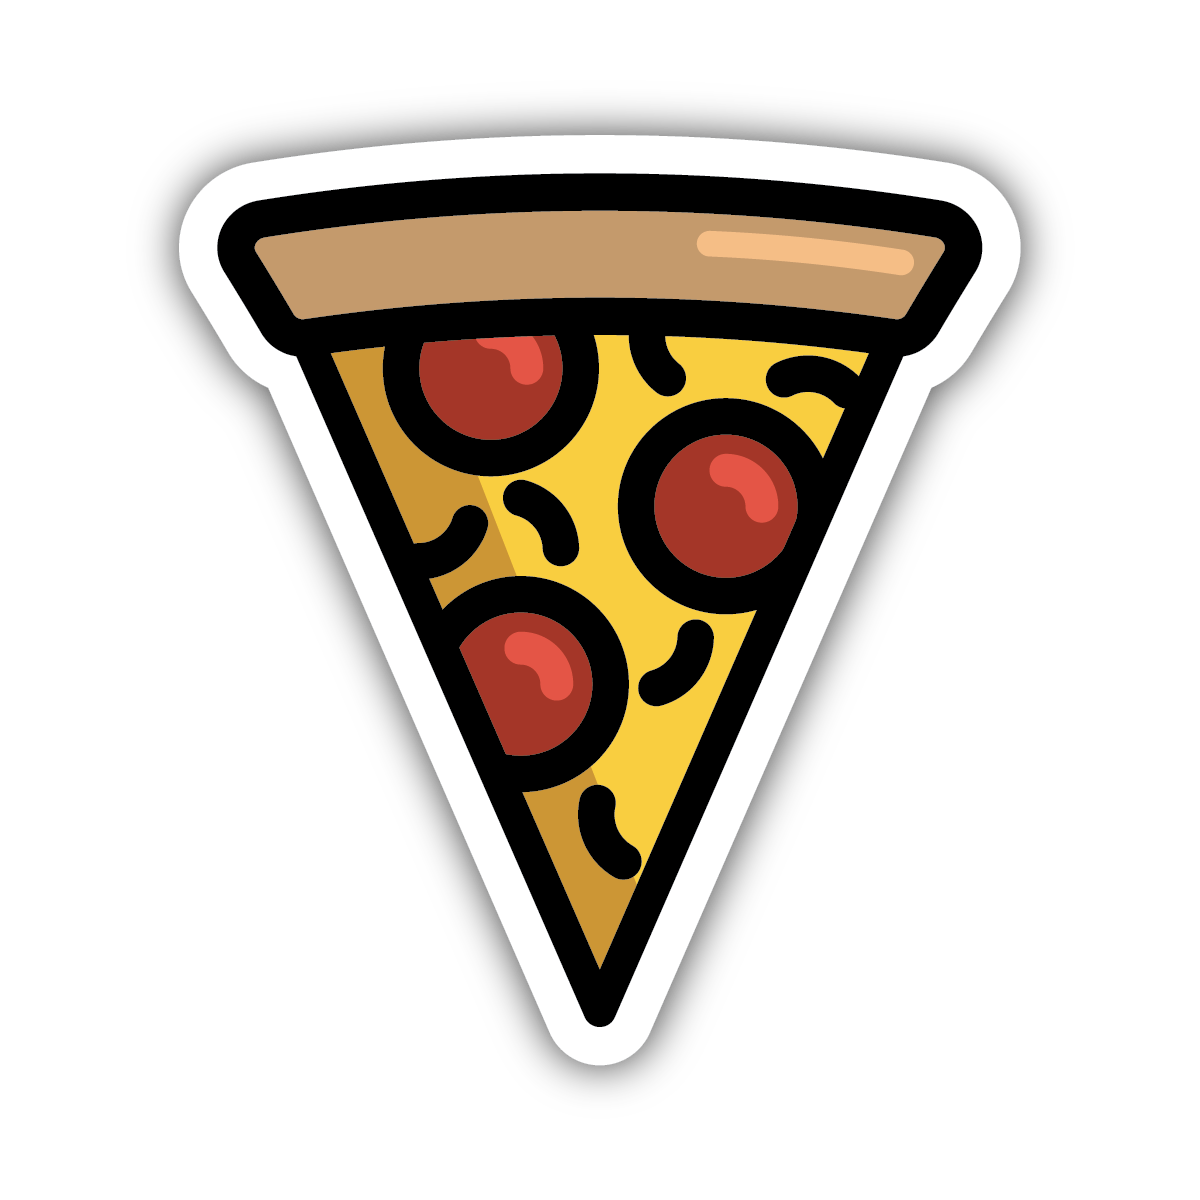 sticker on white background. sticker has graphic of a slice of pepperoni pizza.